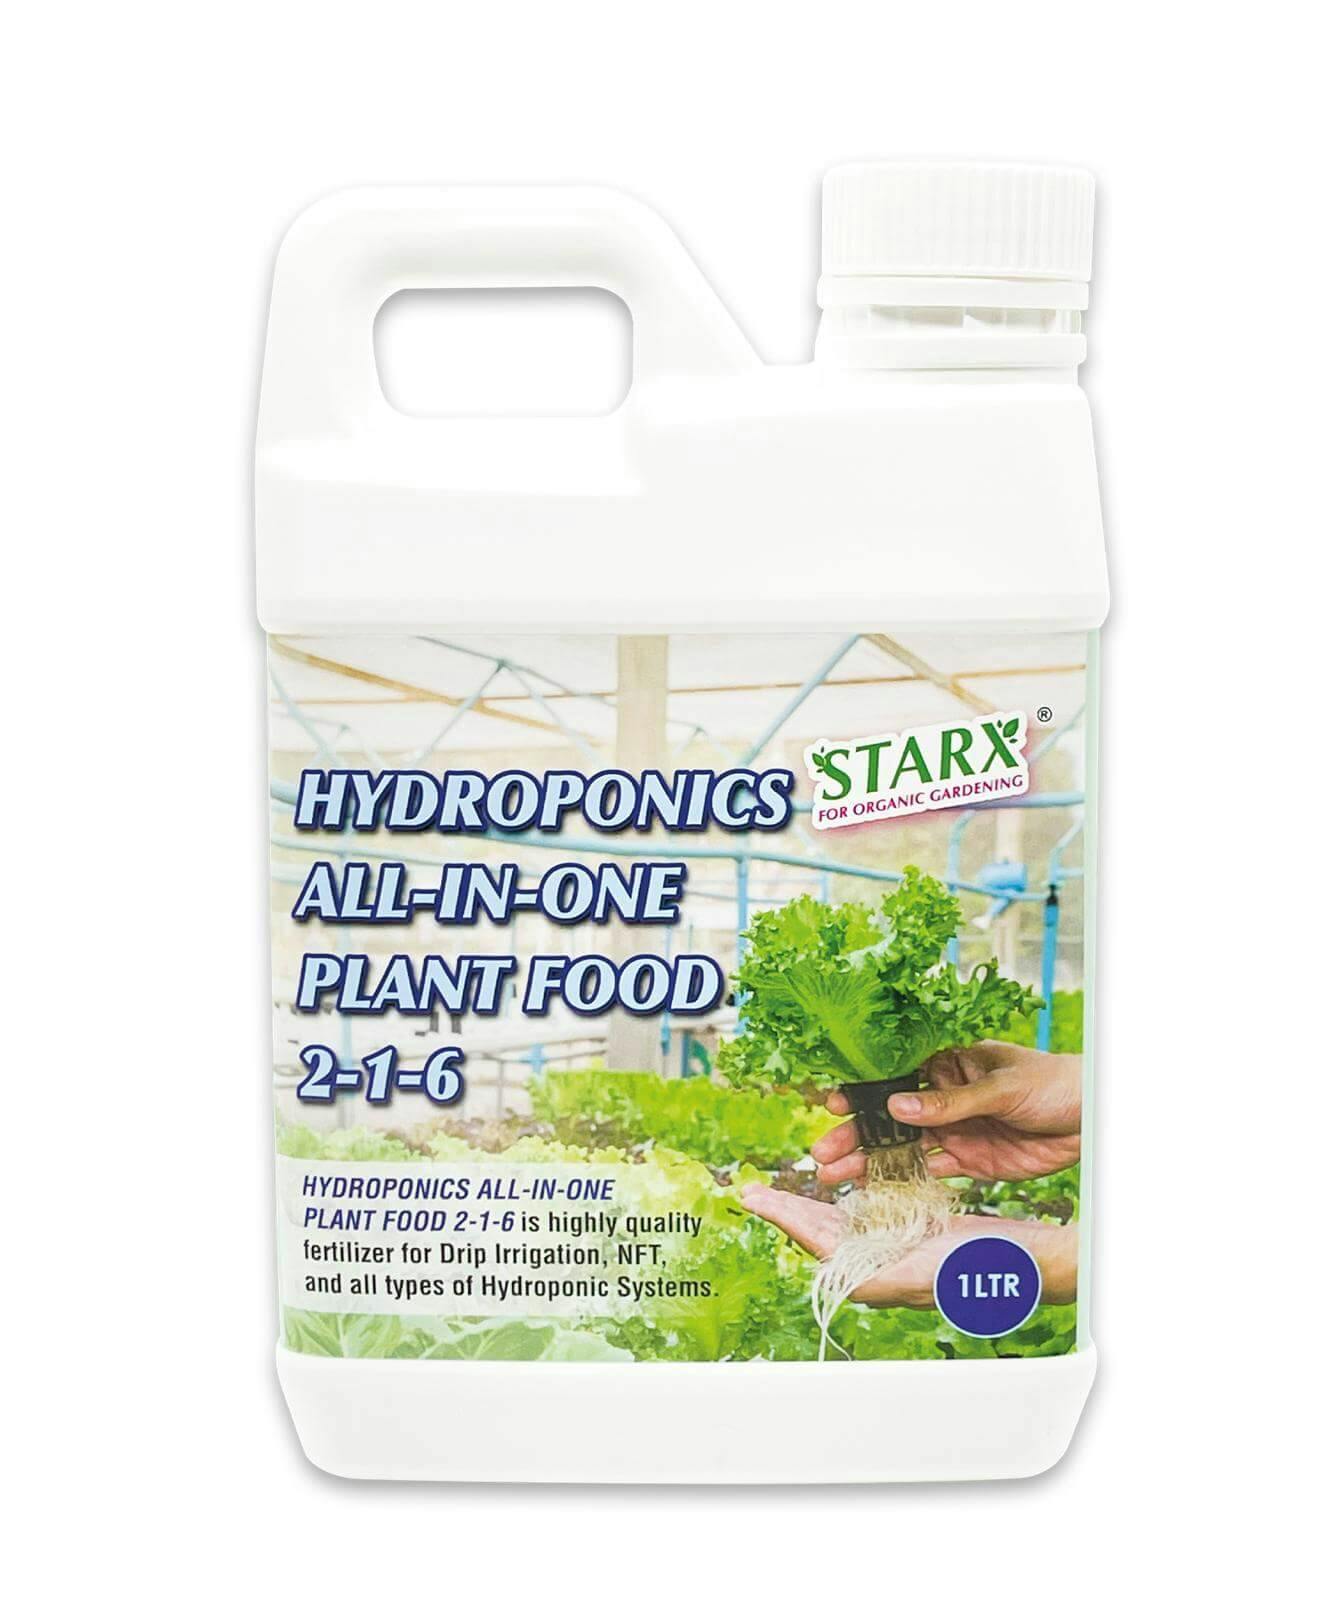 HYDROPONICS ALL-IN-ONE PLANT FOOD 2-1-6